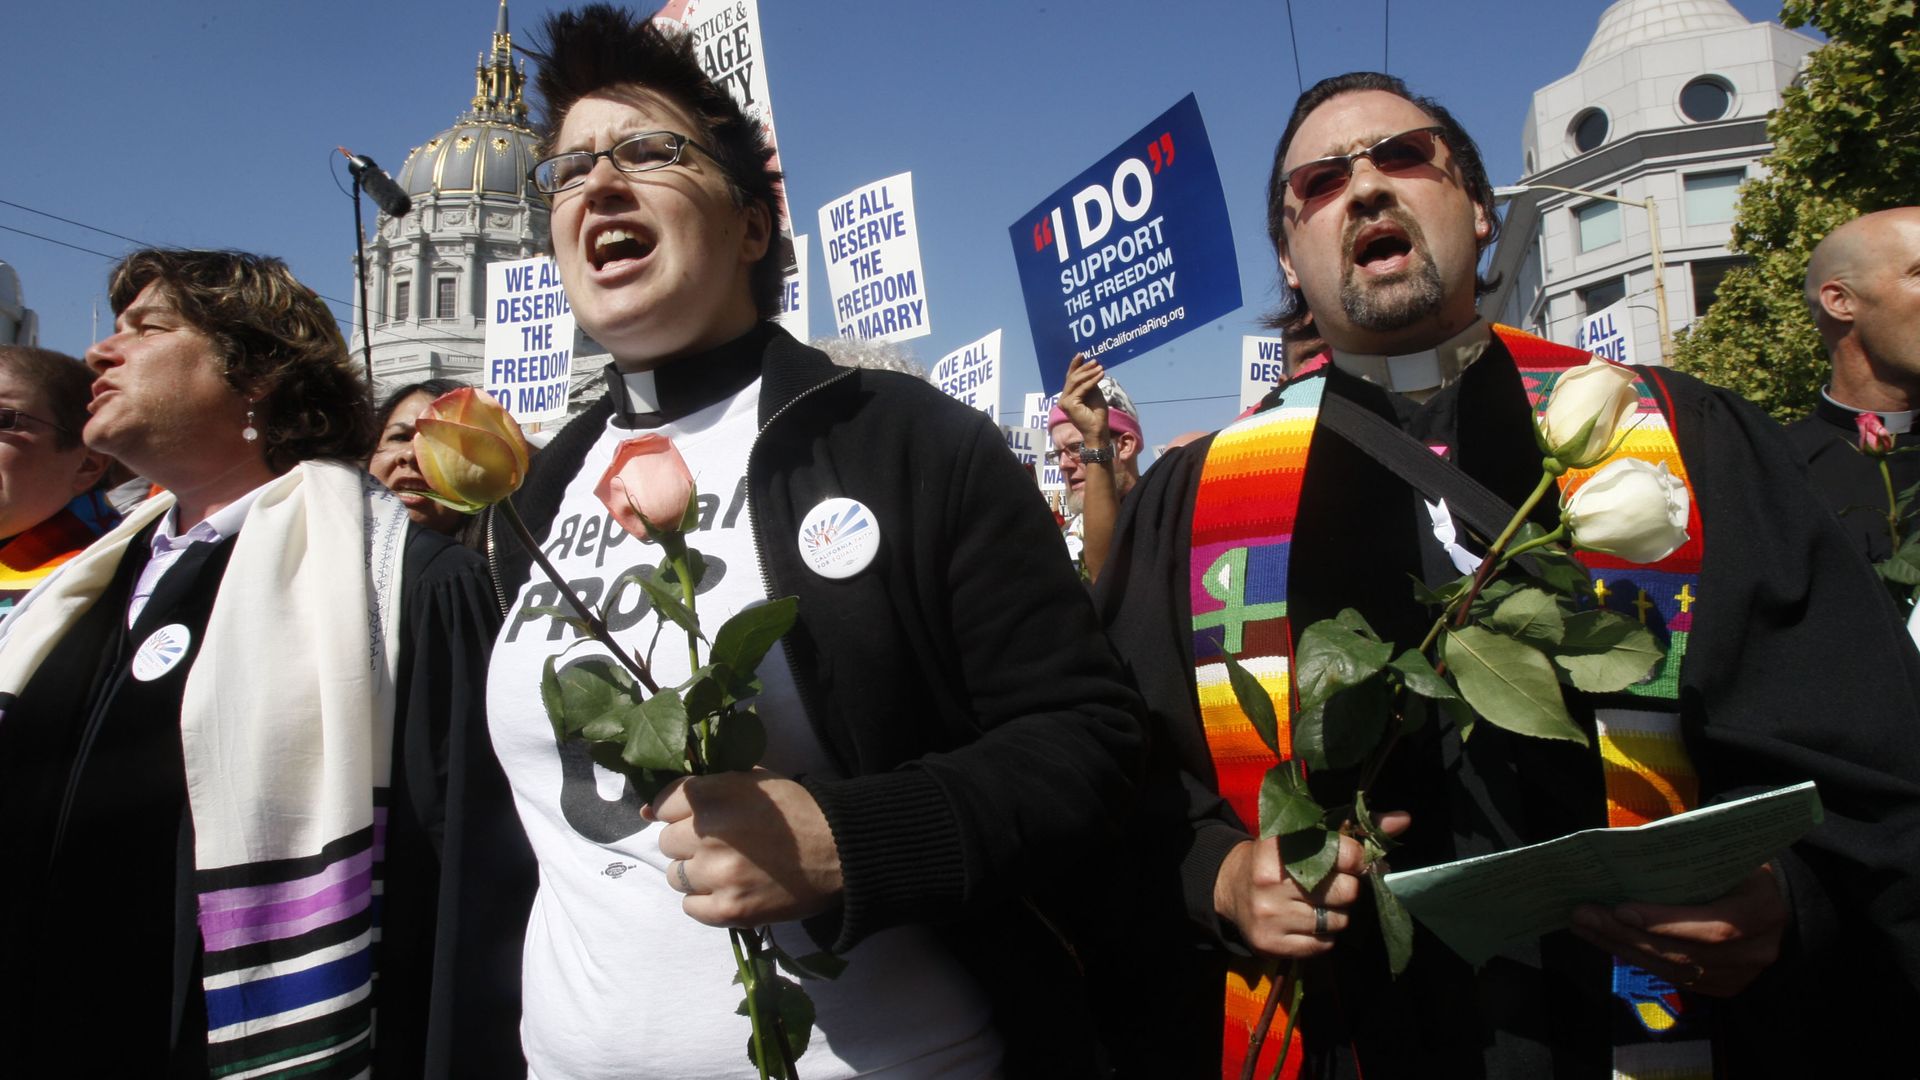 Megan Rohrer (left), from the Welcome Ministry in San Francisco, and Reverend Will McGarvey, from the Community Presbyterian Church in Pittsburg, stand in front of the steps of the Supreme Court.